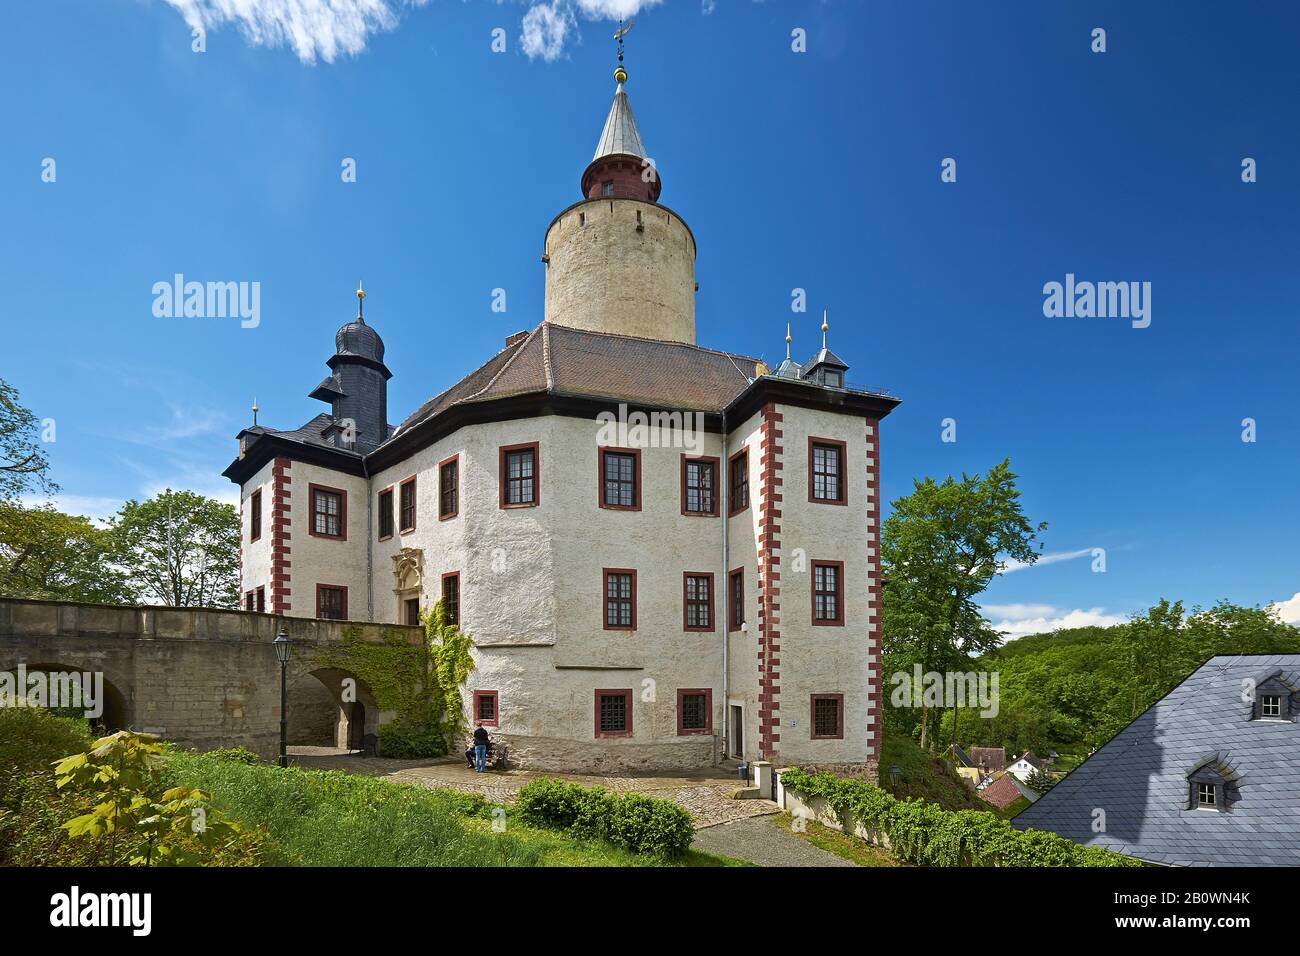 Posterstein Castle in the Upper Sprottental, Altenburger Land District, Thuringia, Germany, Europe Stock Photo